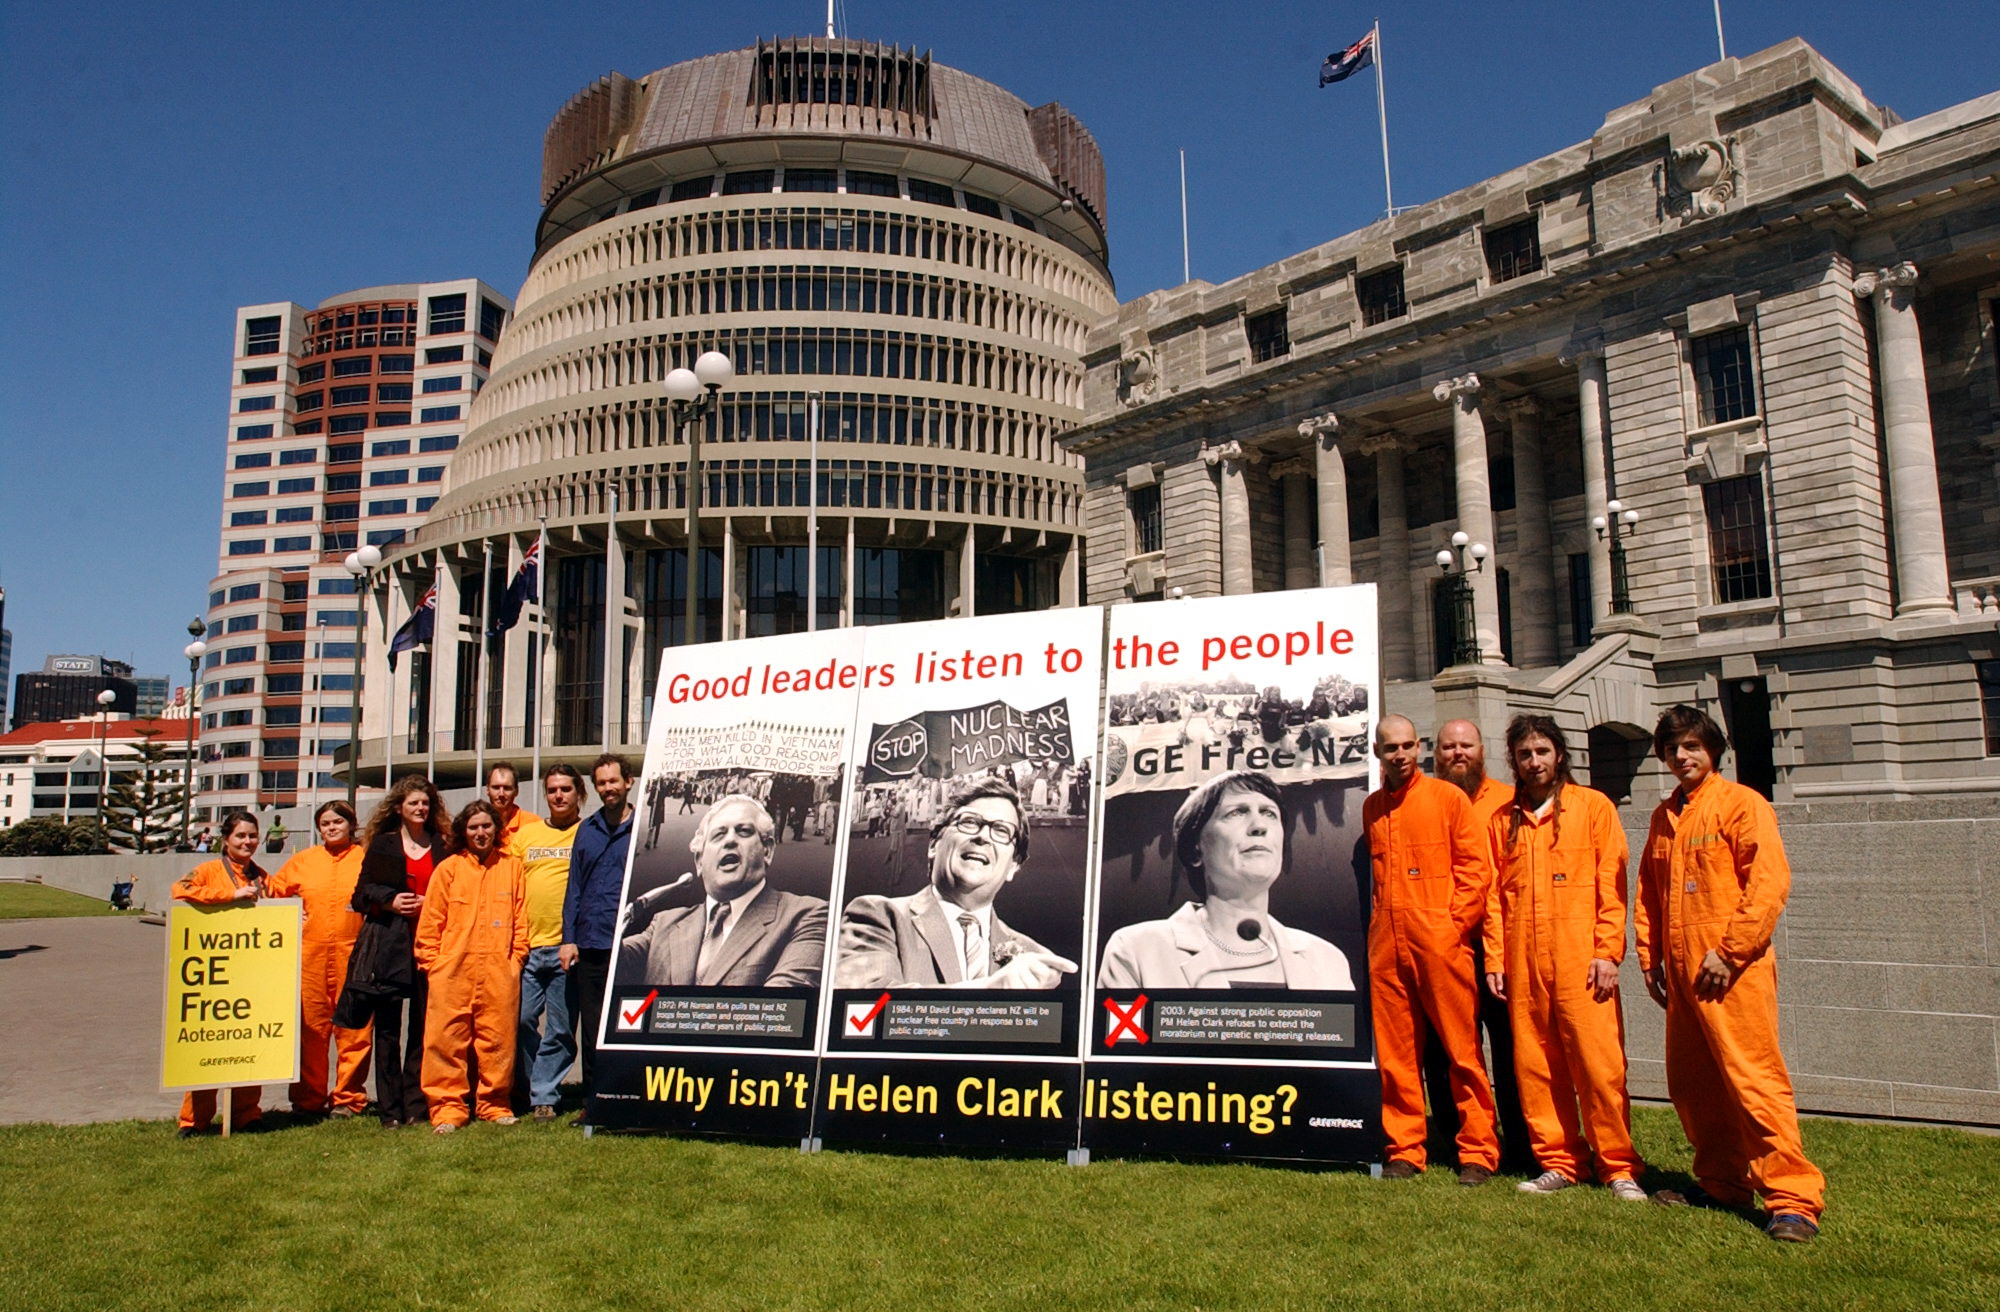 Greenpeace activists protest with a billboard outside the parliament in Wellington. Greenpeace is protesting the Labour Government's decision not to extend the moratorium on GE. The billboard is headed "Good leaders listen to the people" and depicts former Prime Ministers Norman Kirk and David Lange and current PM Helen Clark with historical images of anti-Vietnam, anti-nuclear and anti-GE protests corresponding to each PM with brief descriptions of the actions taken by the respective leaders.